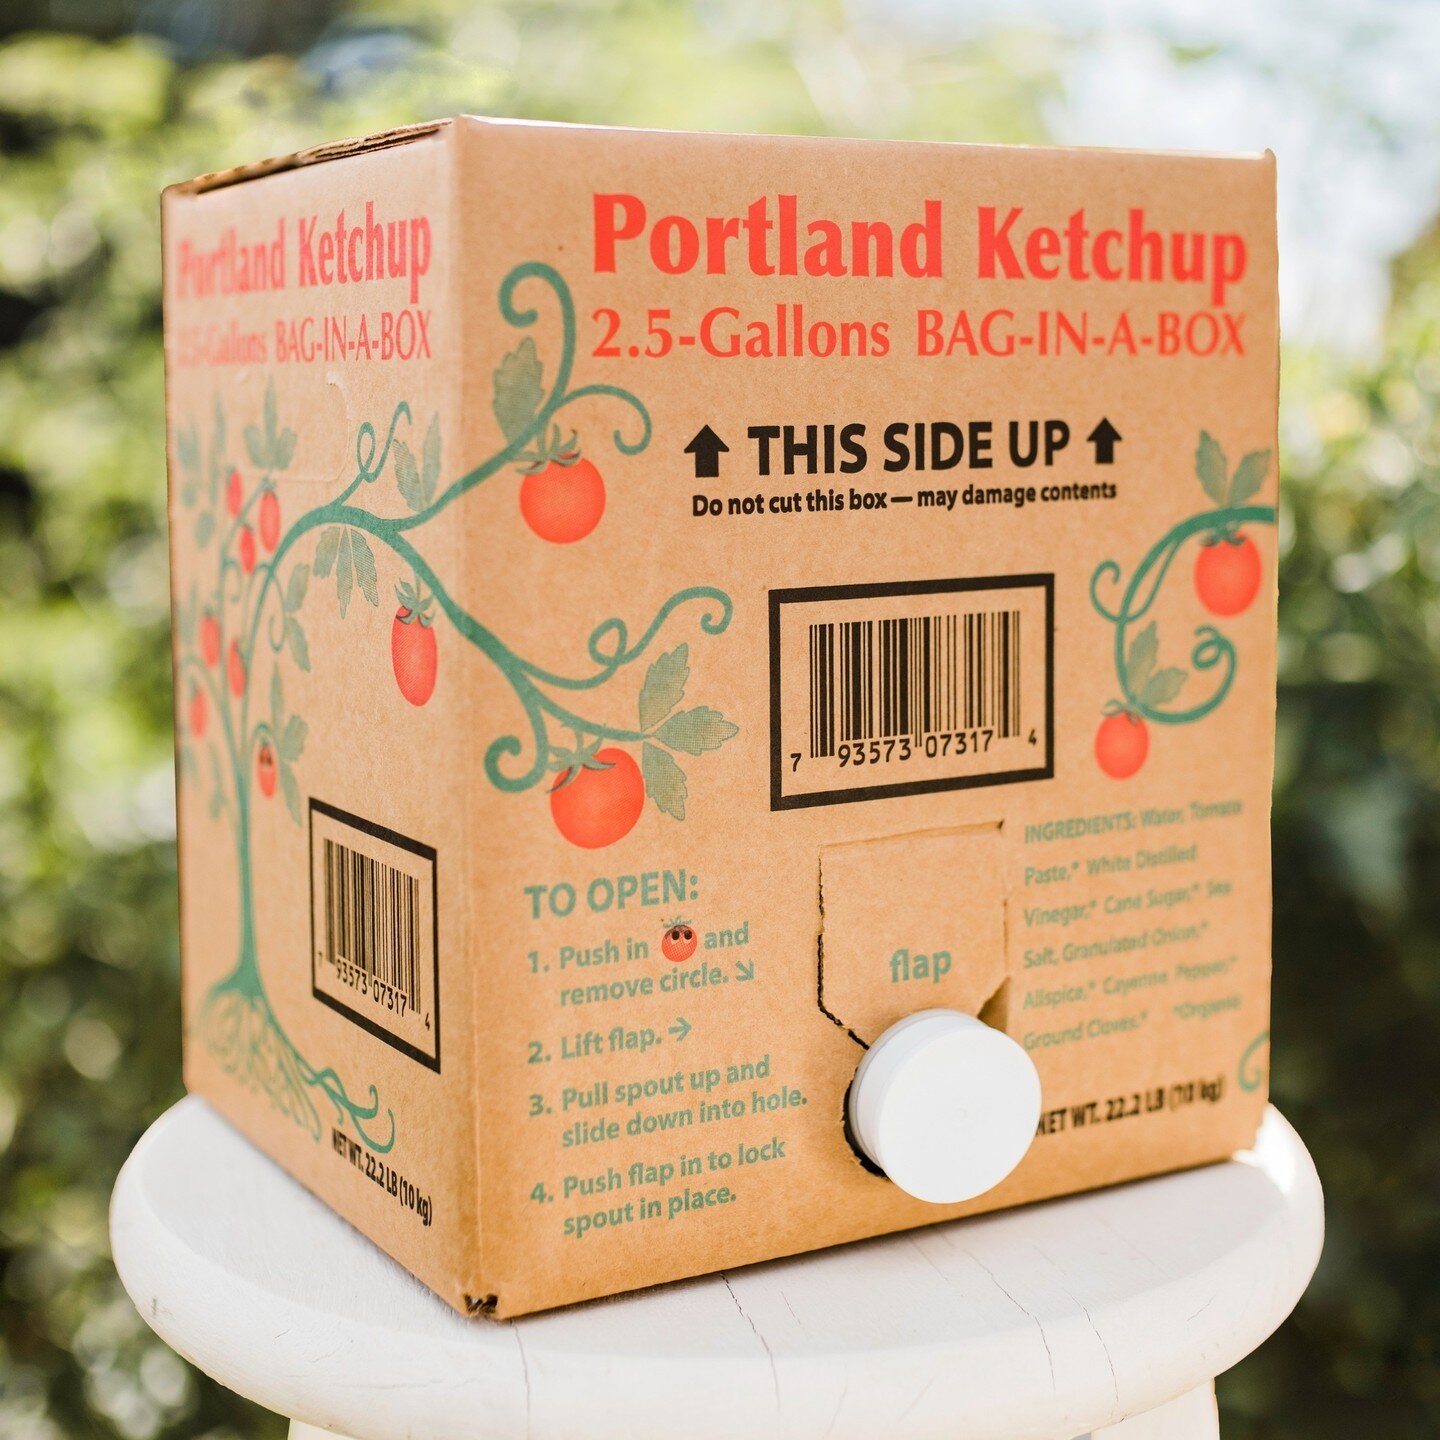 Find our 2.5 Gallon Bulk option at Chef Stores by US Foods. Wether you need for your restaurant or for your home, our beautifully drawn package in this bulk setting offers a great value and environmentally responsible as well 🌎️⁠
.⁠
.⁠
Go Bib or Go 